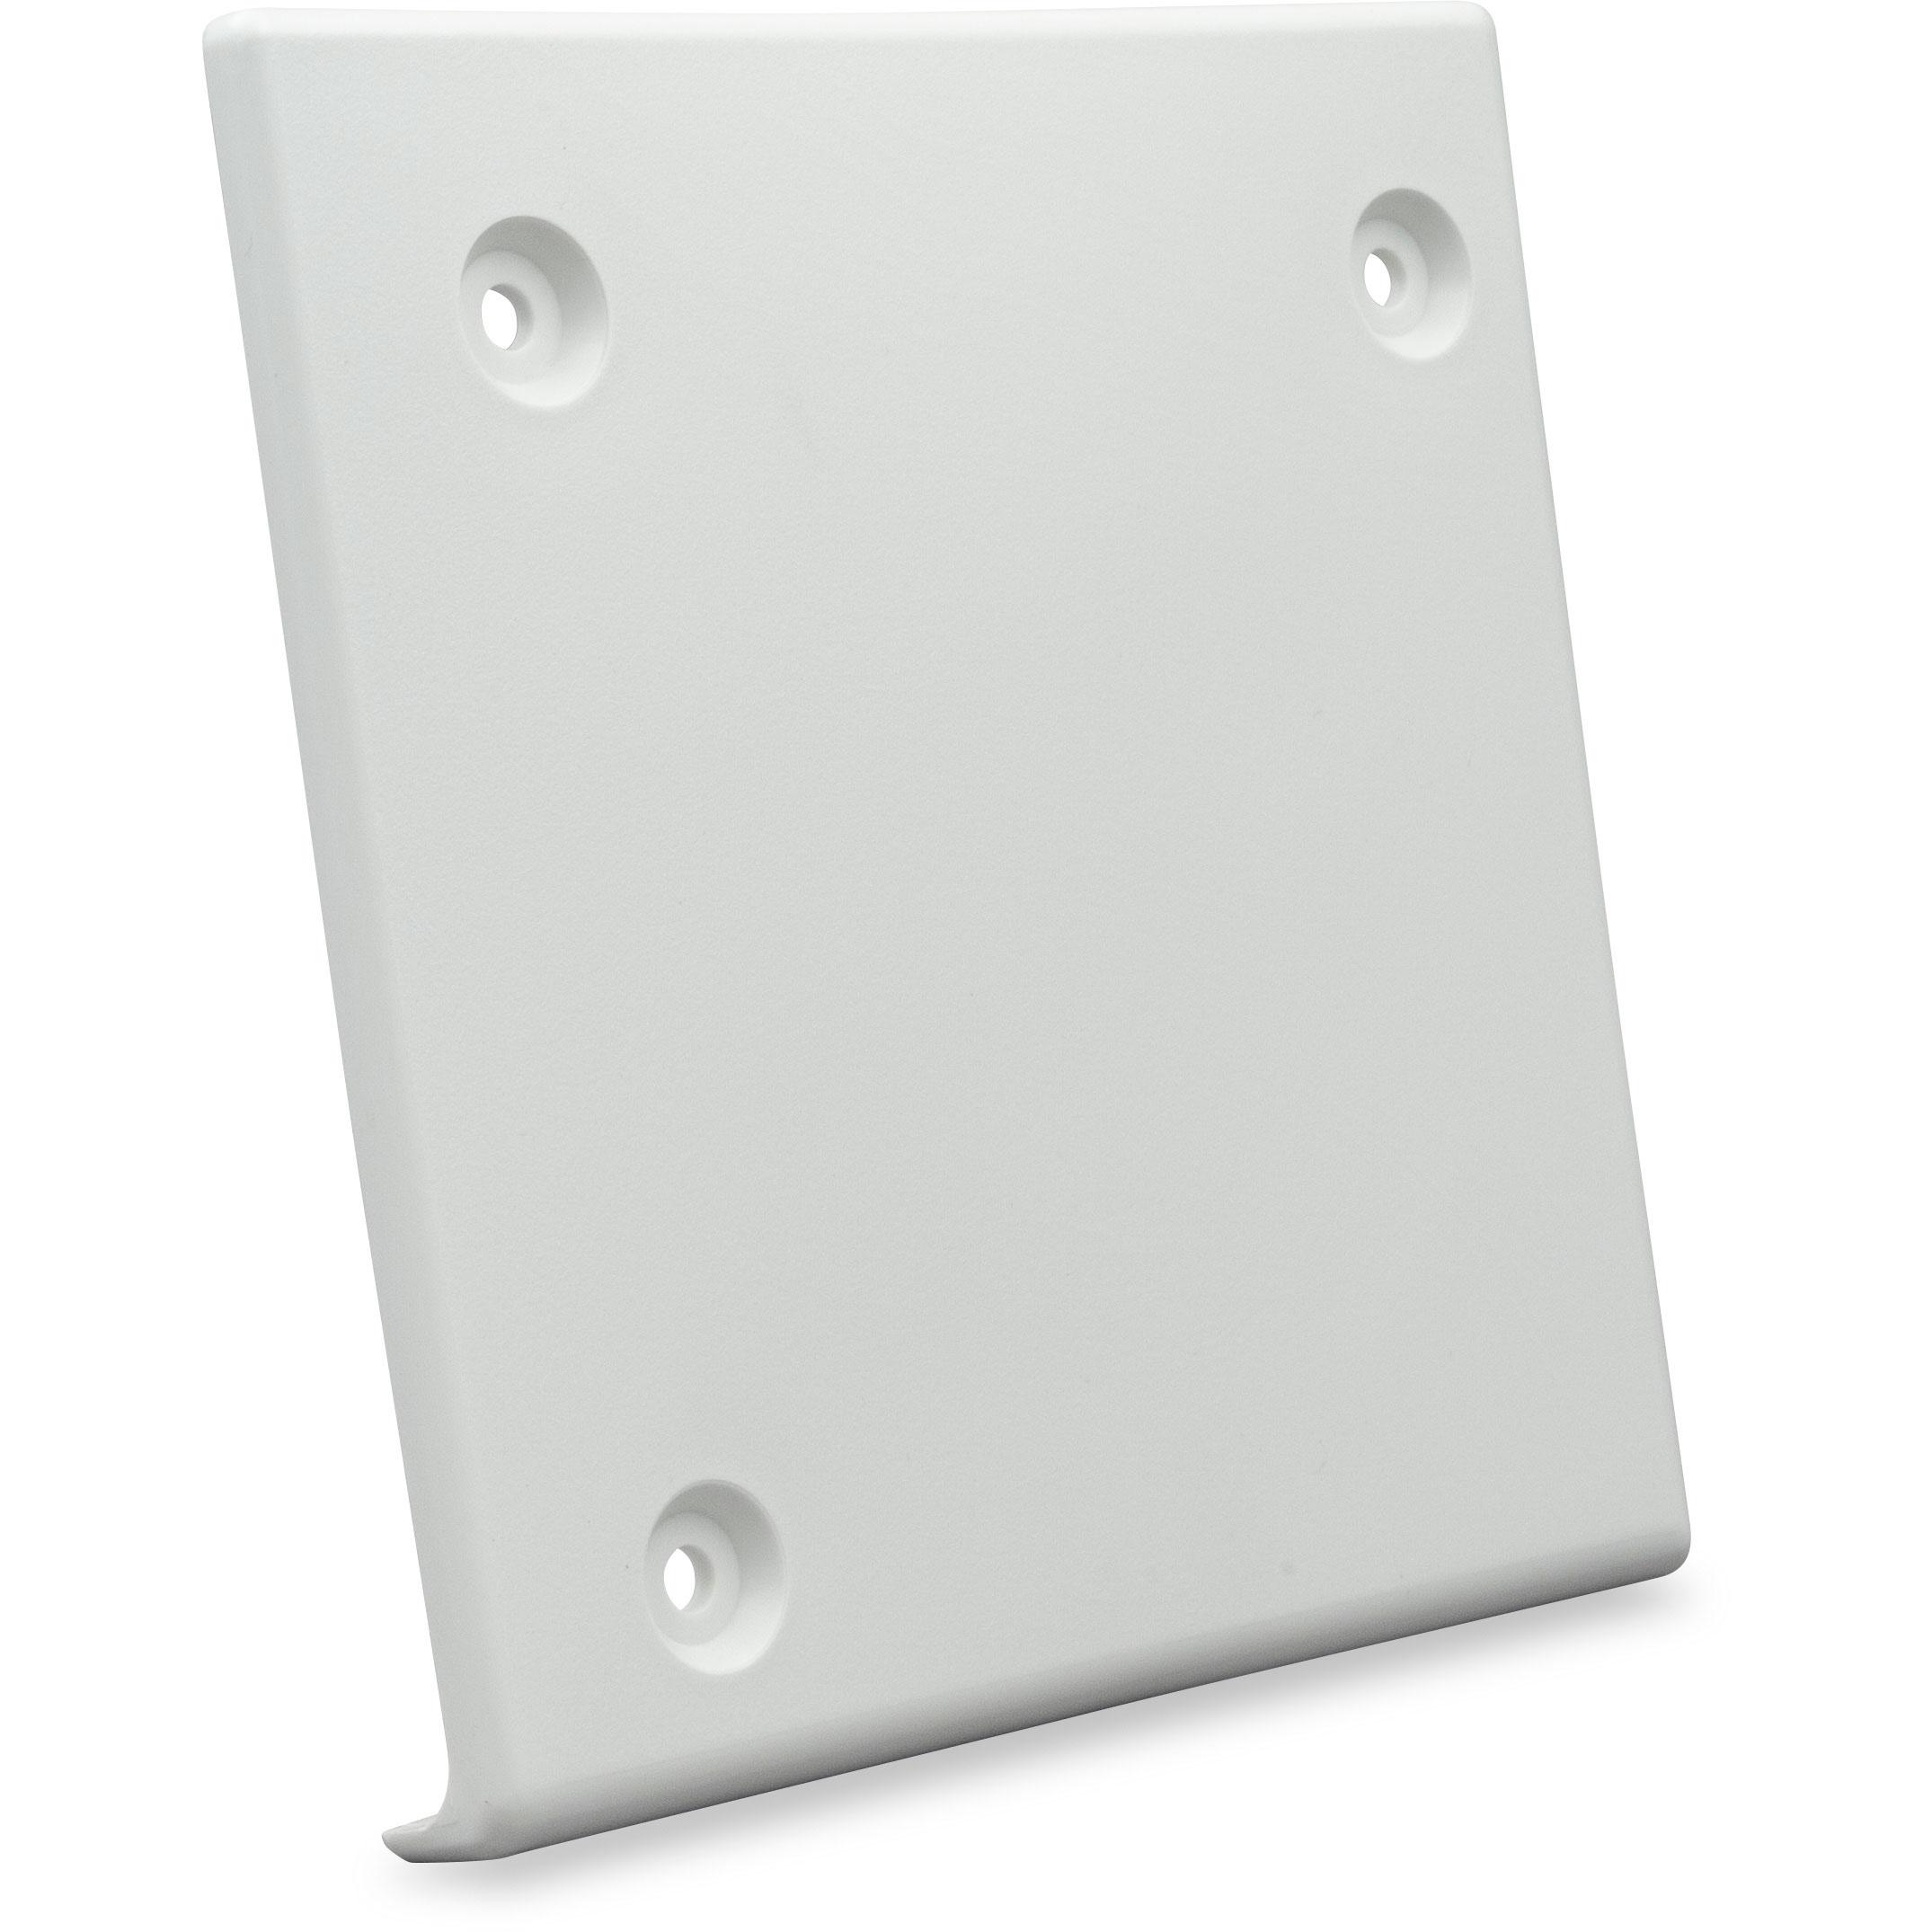 865-94291 Square Corner Slide-Out Extrusion Cover4.75